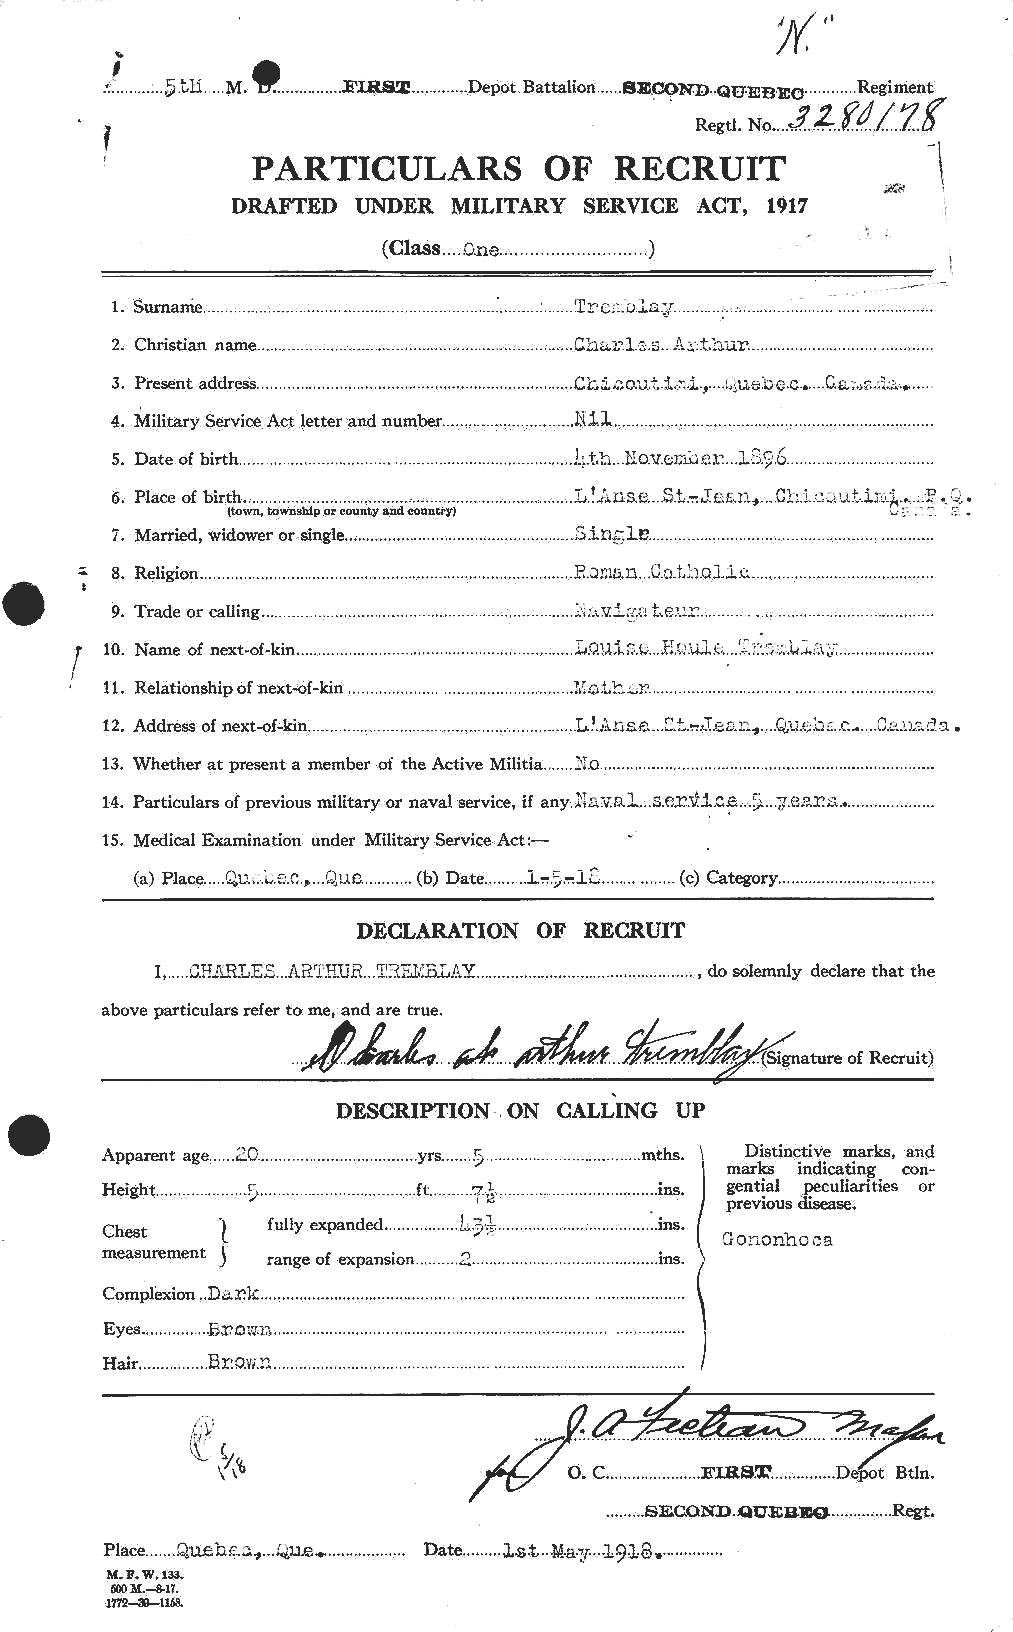 Personnel Records of the First World War - CEF 638984a